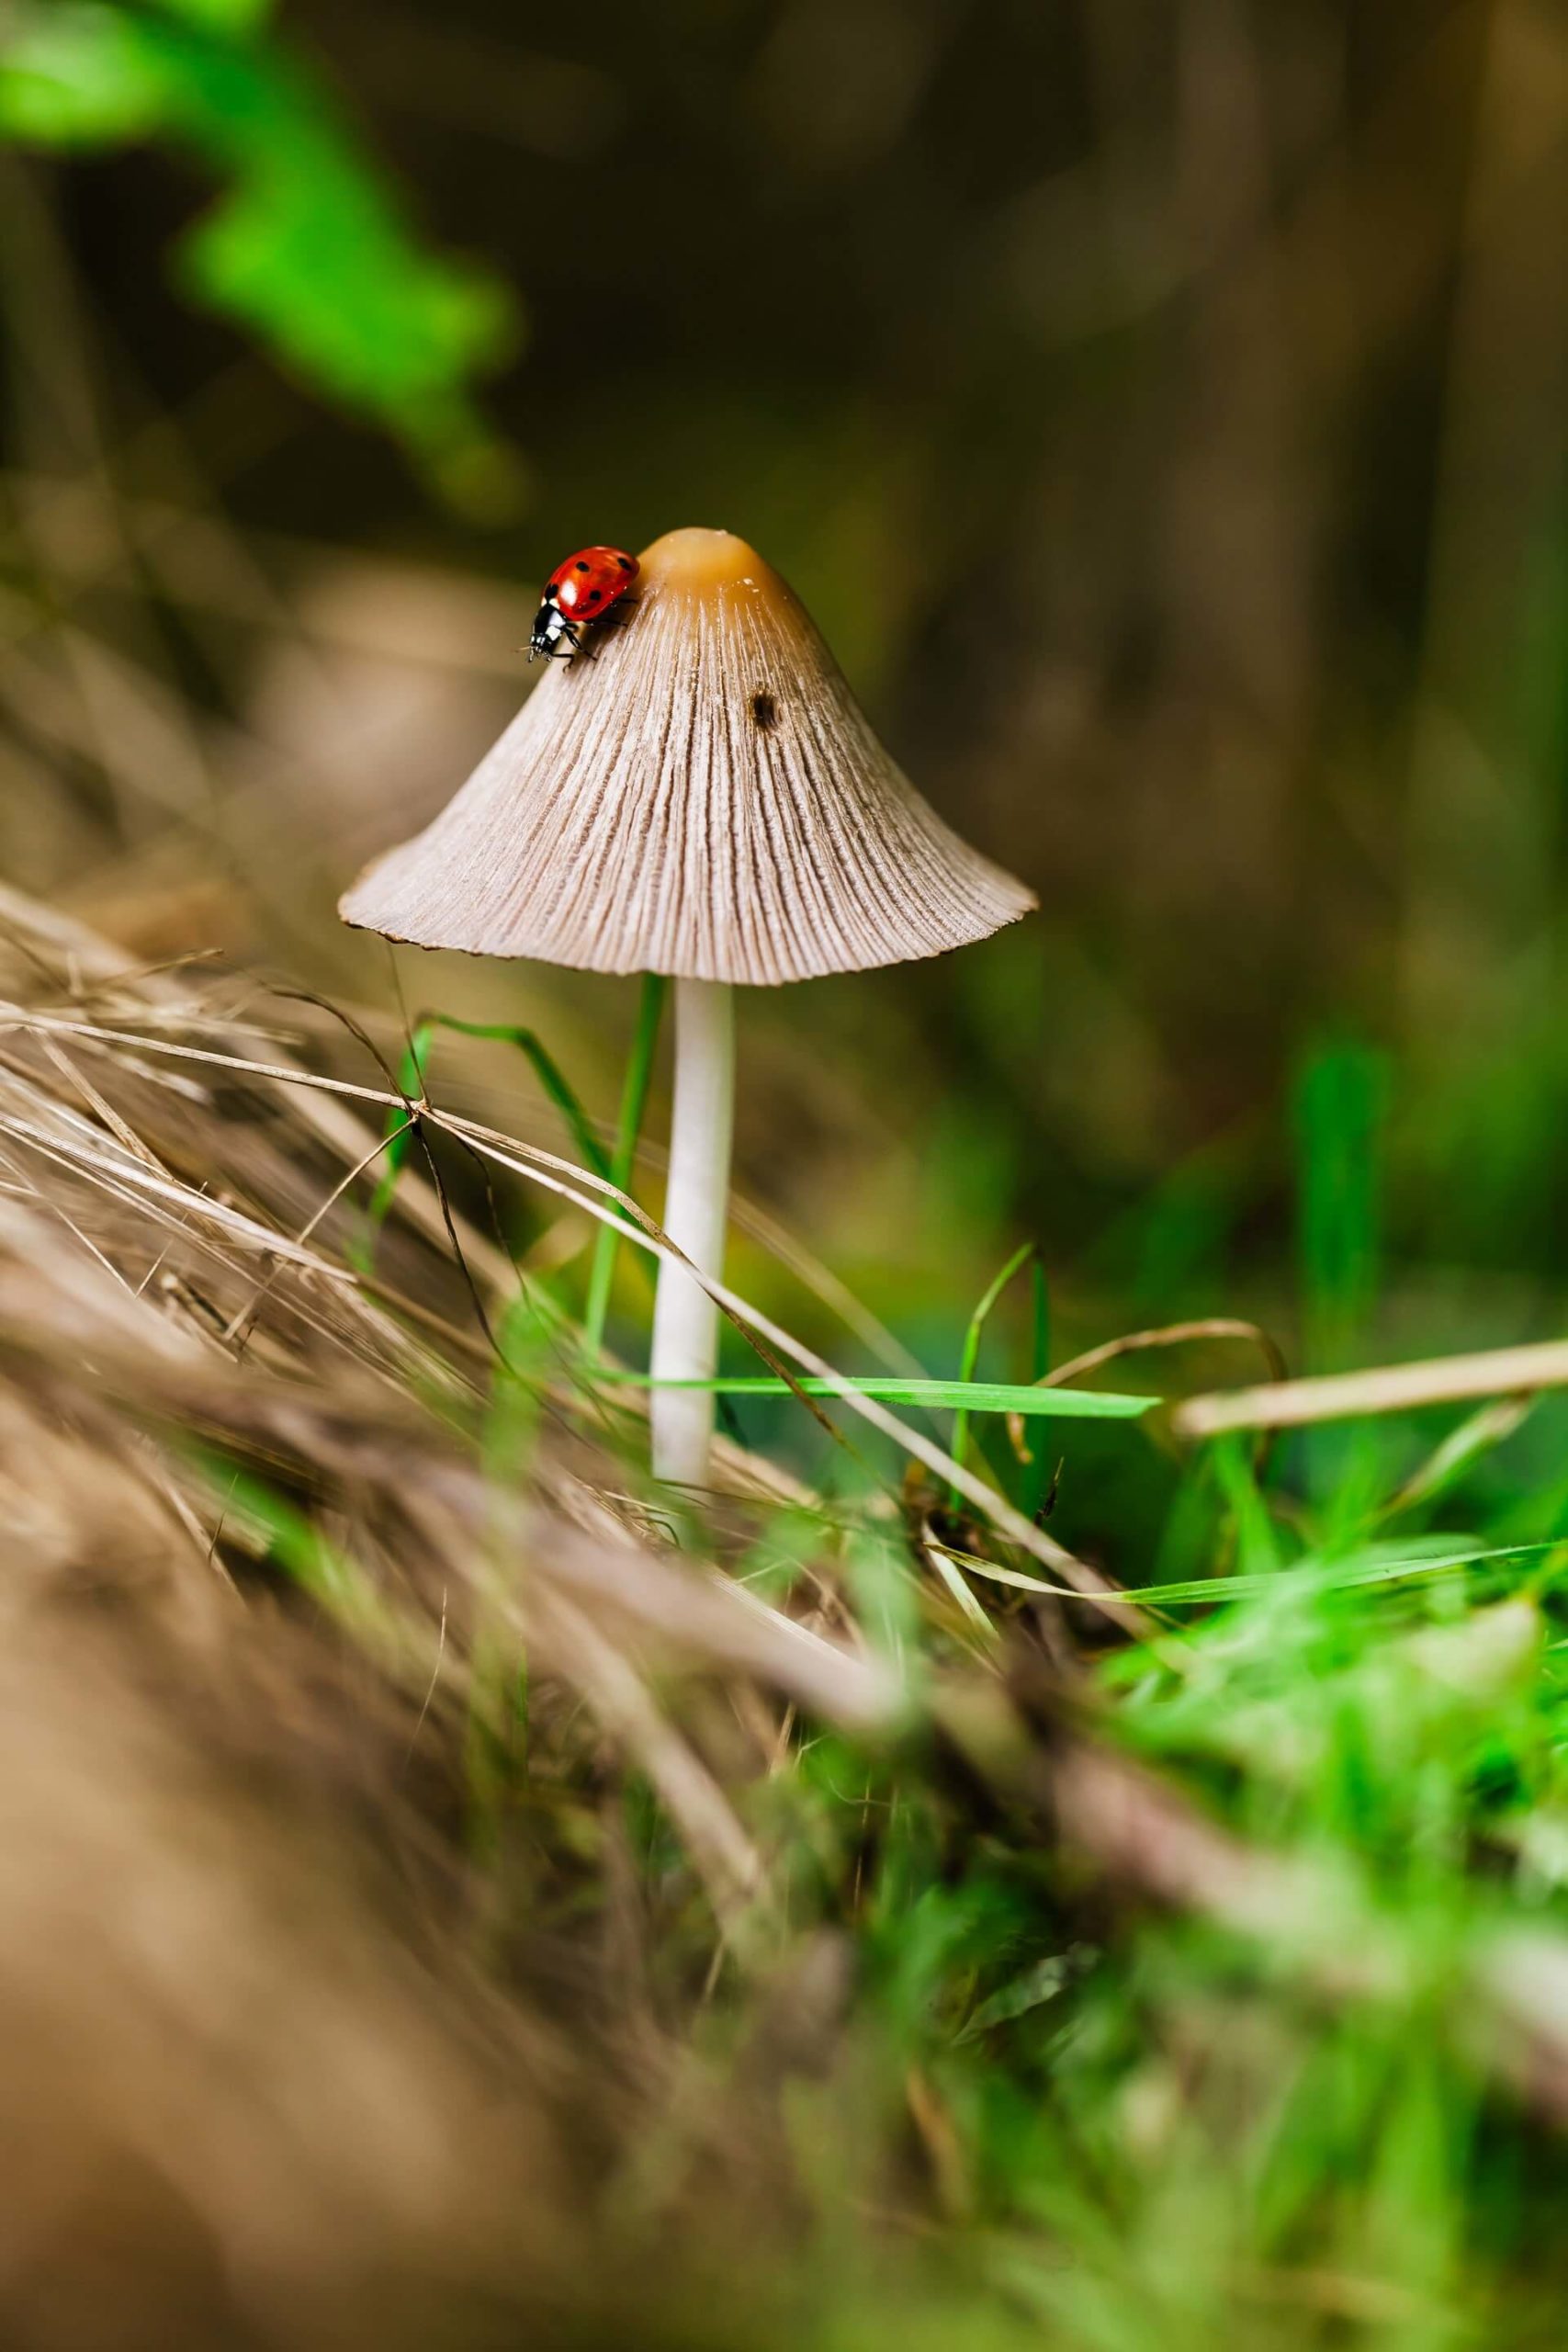 Ladybug climbing across a magic mushroom growing in the forest